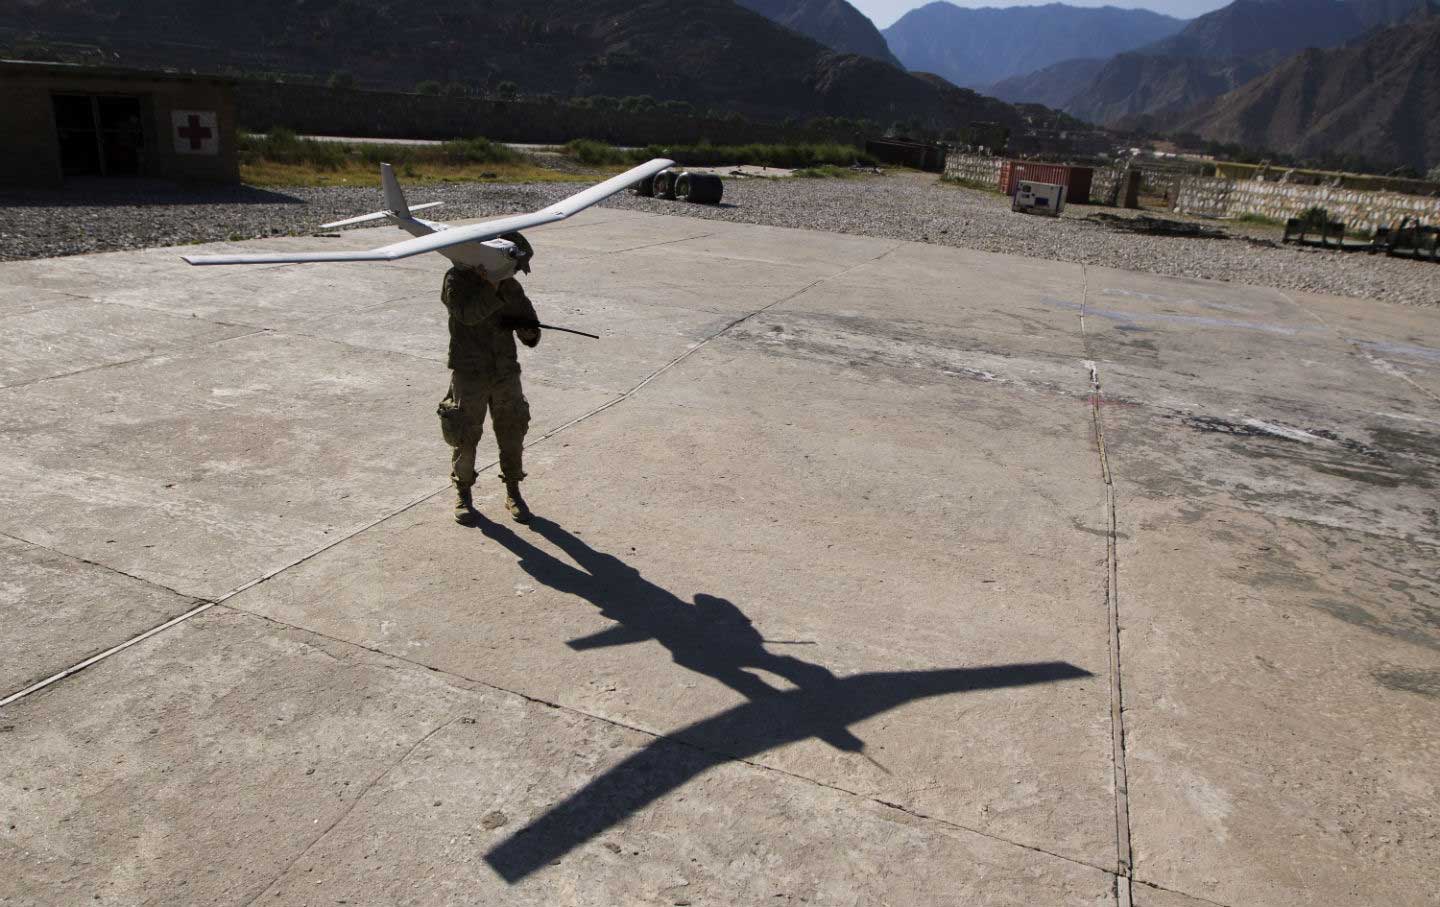 A soldier prepares to launch a drone in Afghanistan.